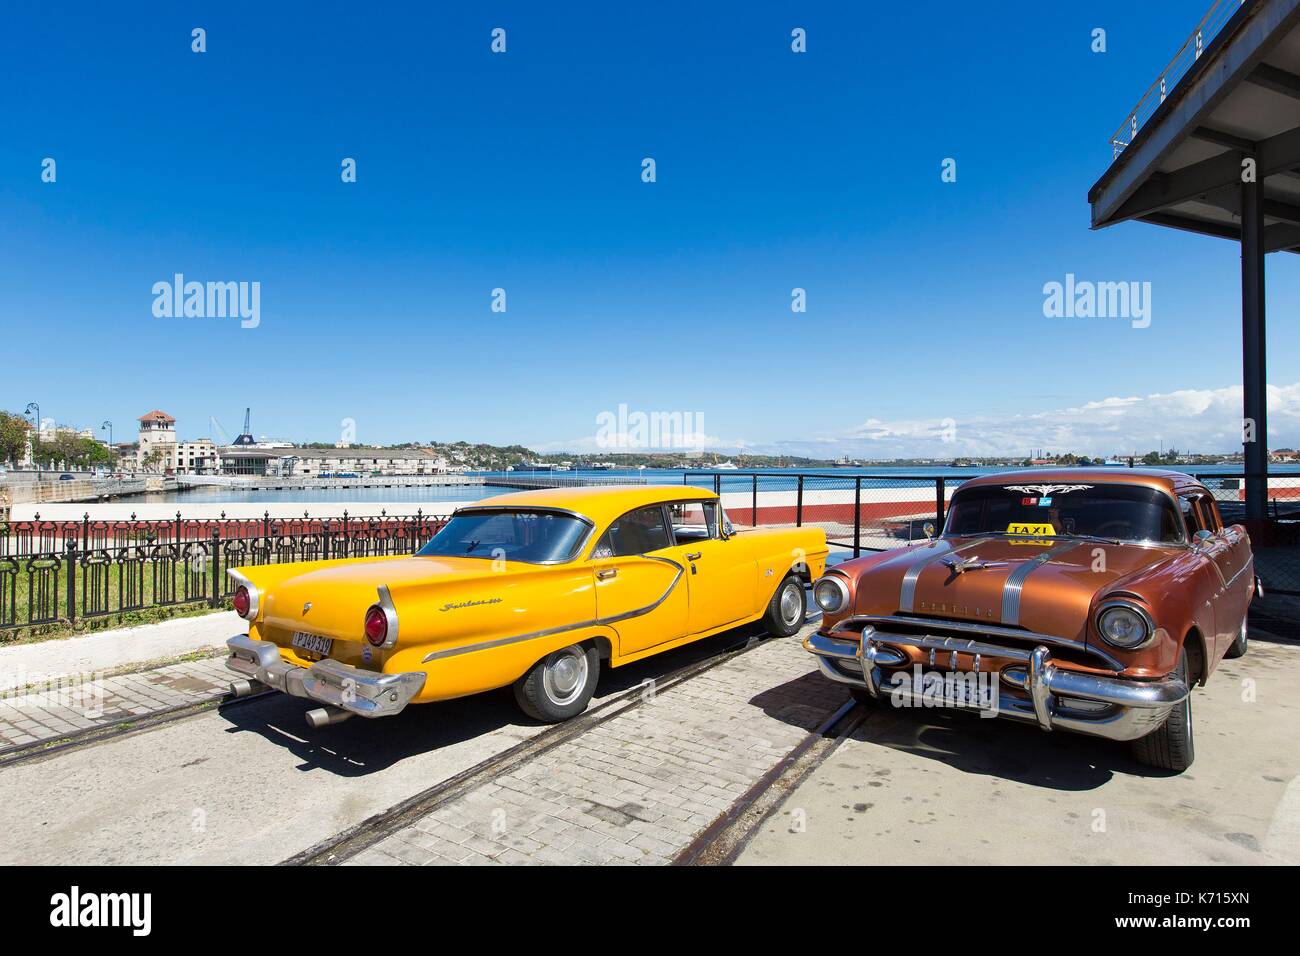 Cuba, Ciudad de la Habana province, Havana, Habana Vieja district listed as World Heritage by UNESCO, american cars parked in front of the new restaurant hosted in the old wood and tobaco warehouse (Almacen de la madera y del tabacco) on Port Avenue (Avenida del Puerto) Stock Photo